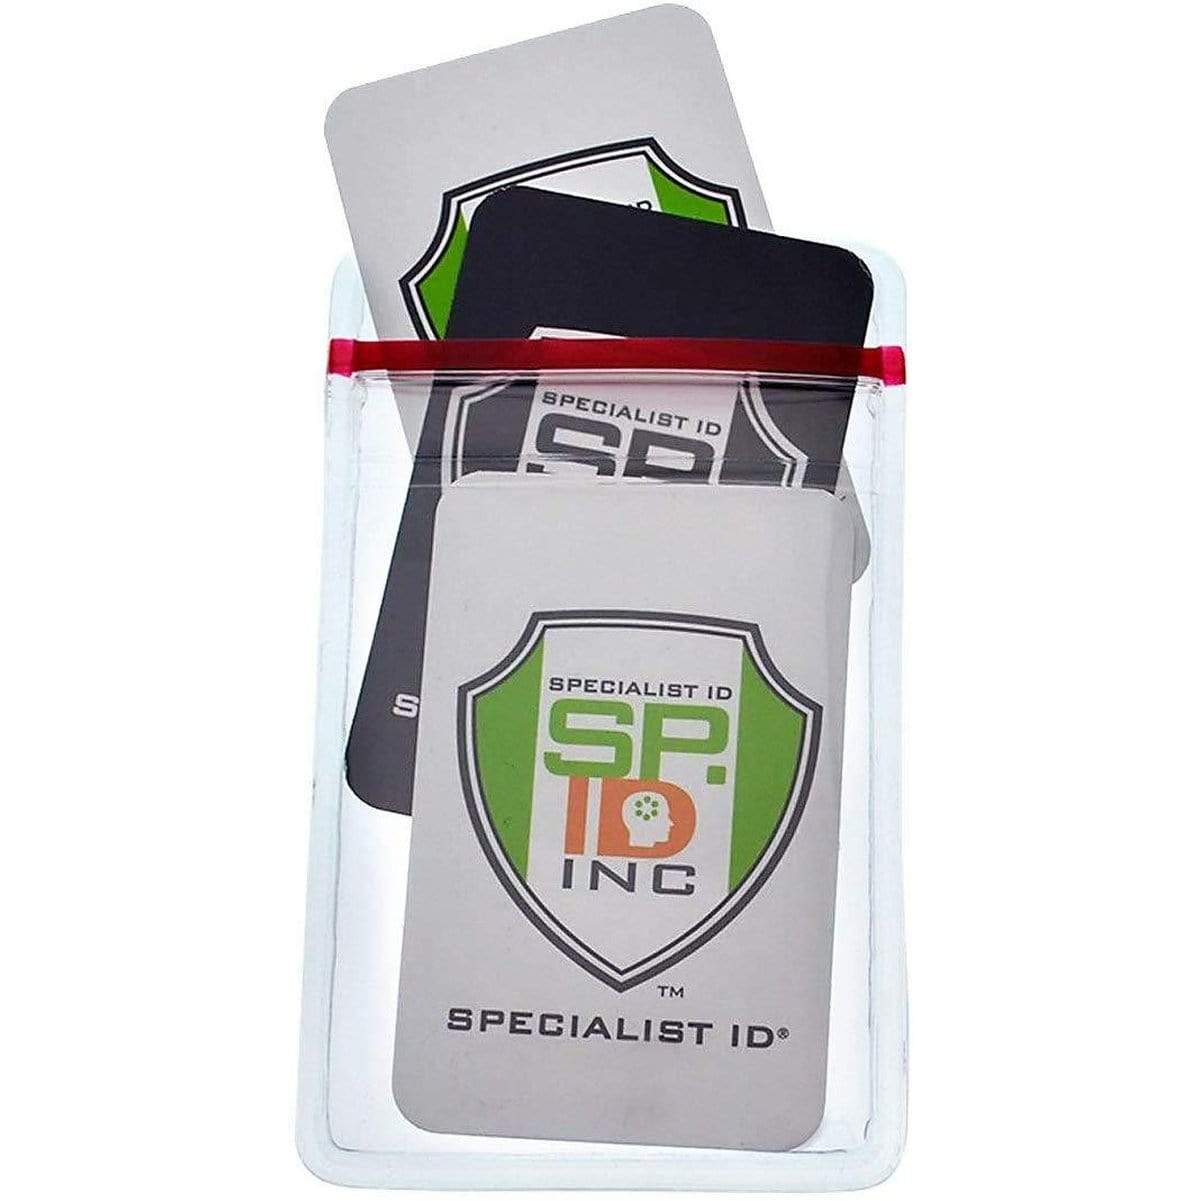 Three Heavy Duty Vertical Multi-Card Badge Holder with Resealable Zip Top (1815-1110) in black and gray are shown inside a clear plastic envelope with a red resealable top seal. The badges, which feature a green and orange logo, are designed for vertical ID display.